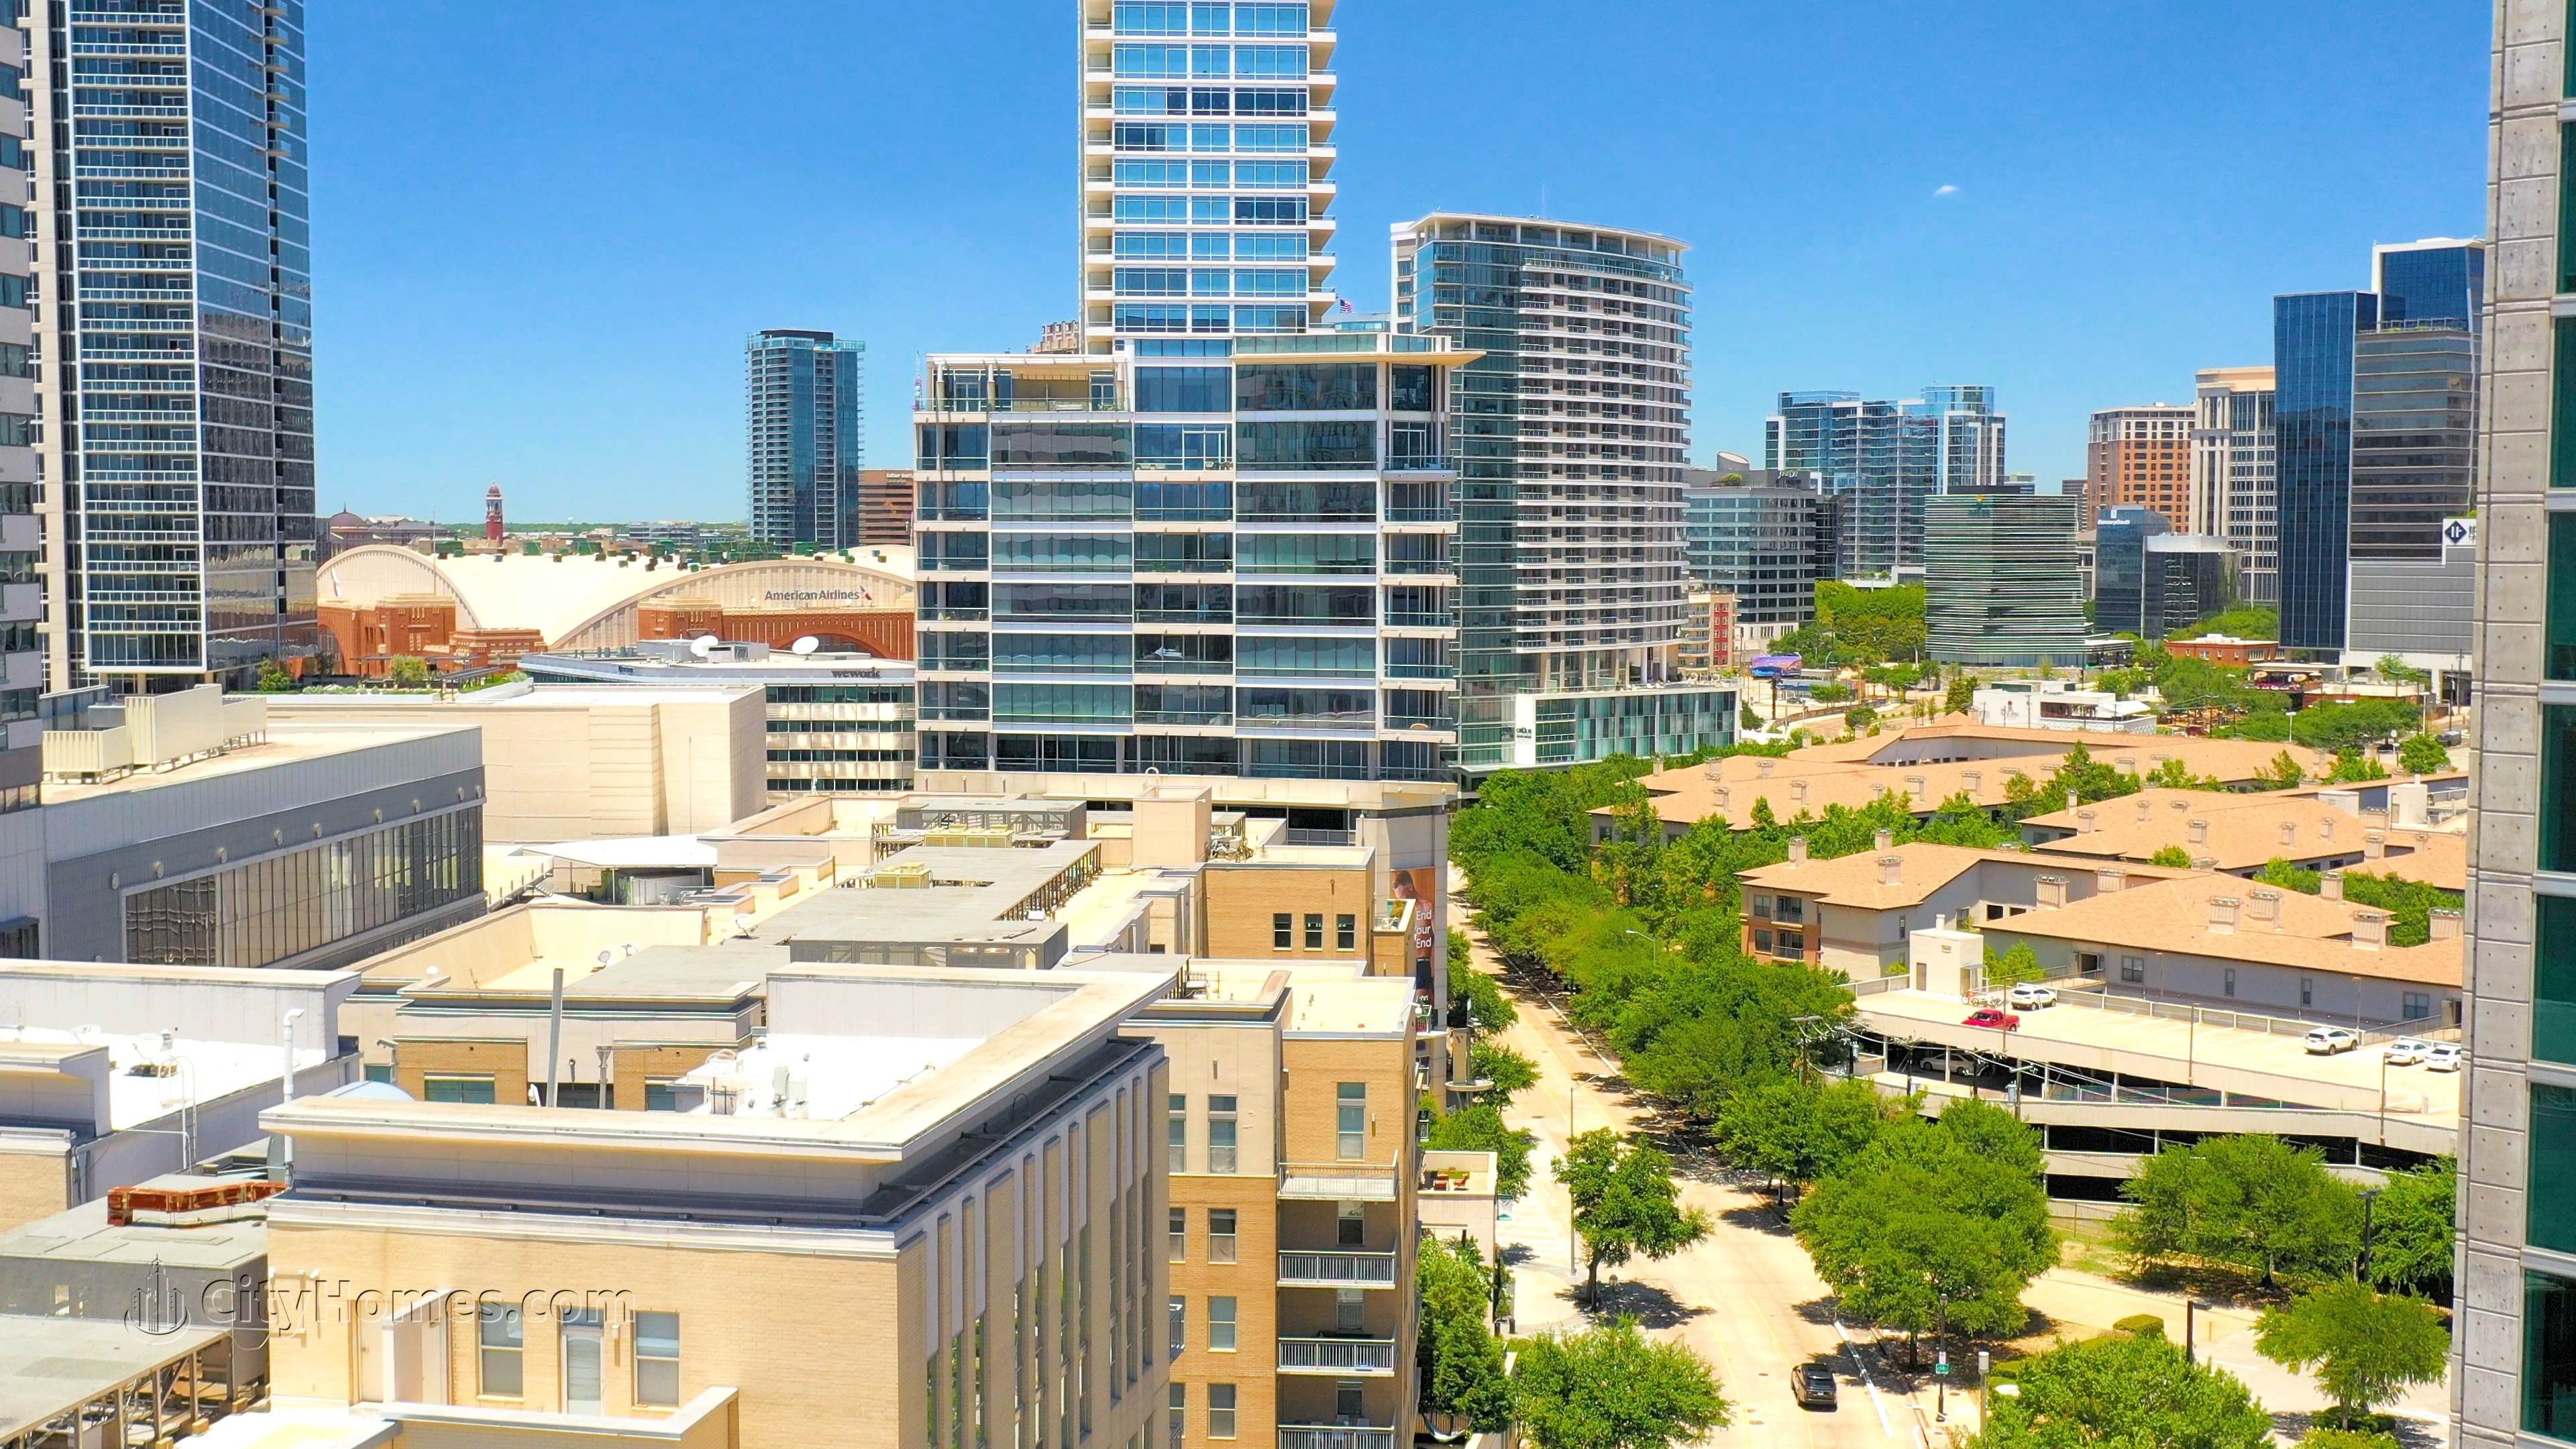 Stoneleigh Residences building at 2300 Wolf Street, Uptown Dallas, Dallas, TX 75201